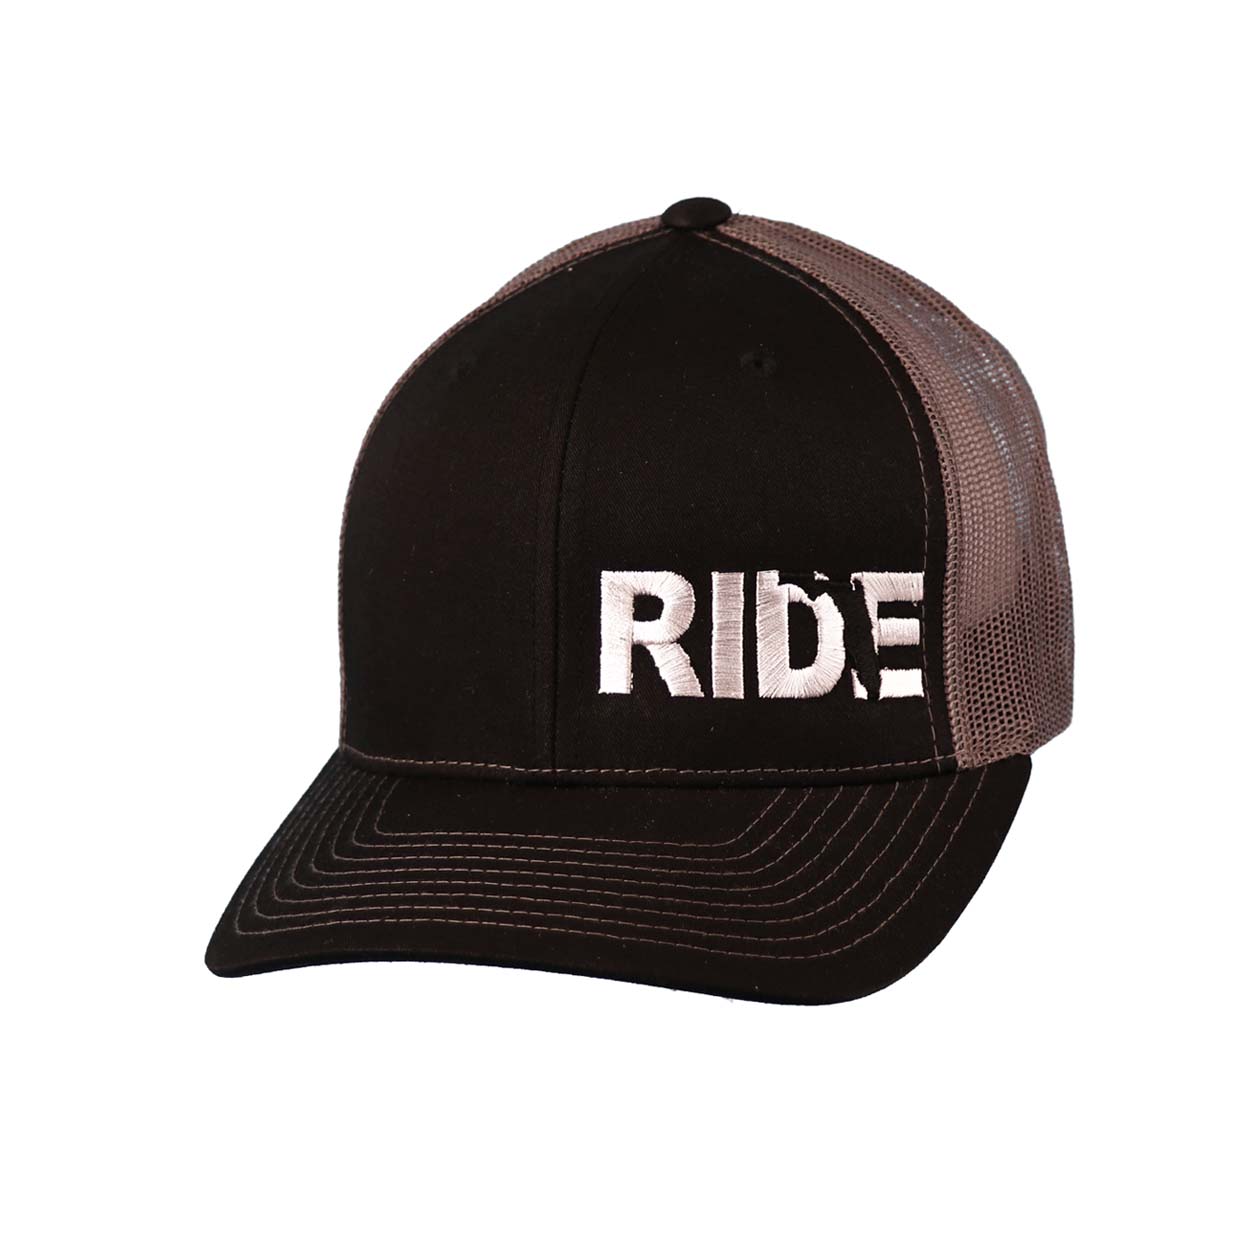 Ride Florida Classic Pro Night Out Embroidered Snapback Trucker Hat Black/Gray